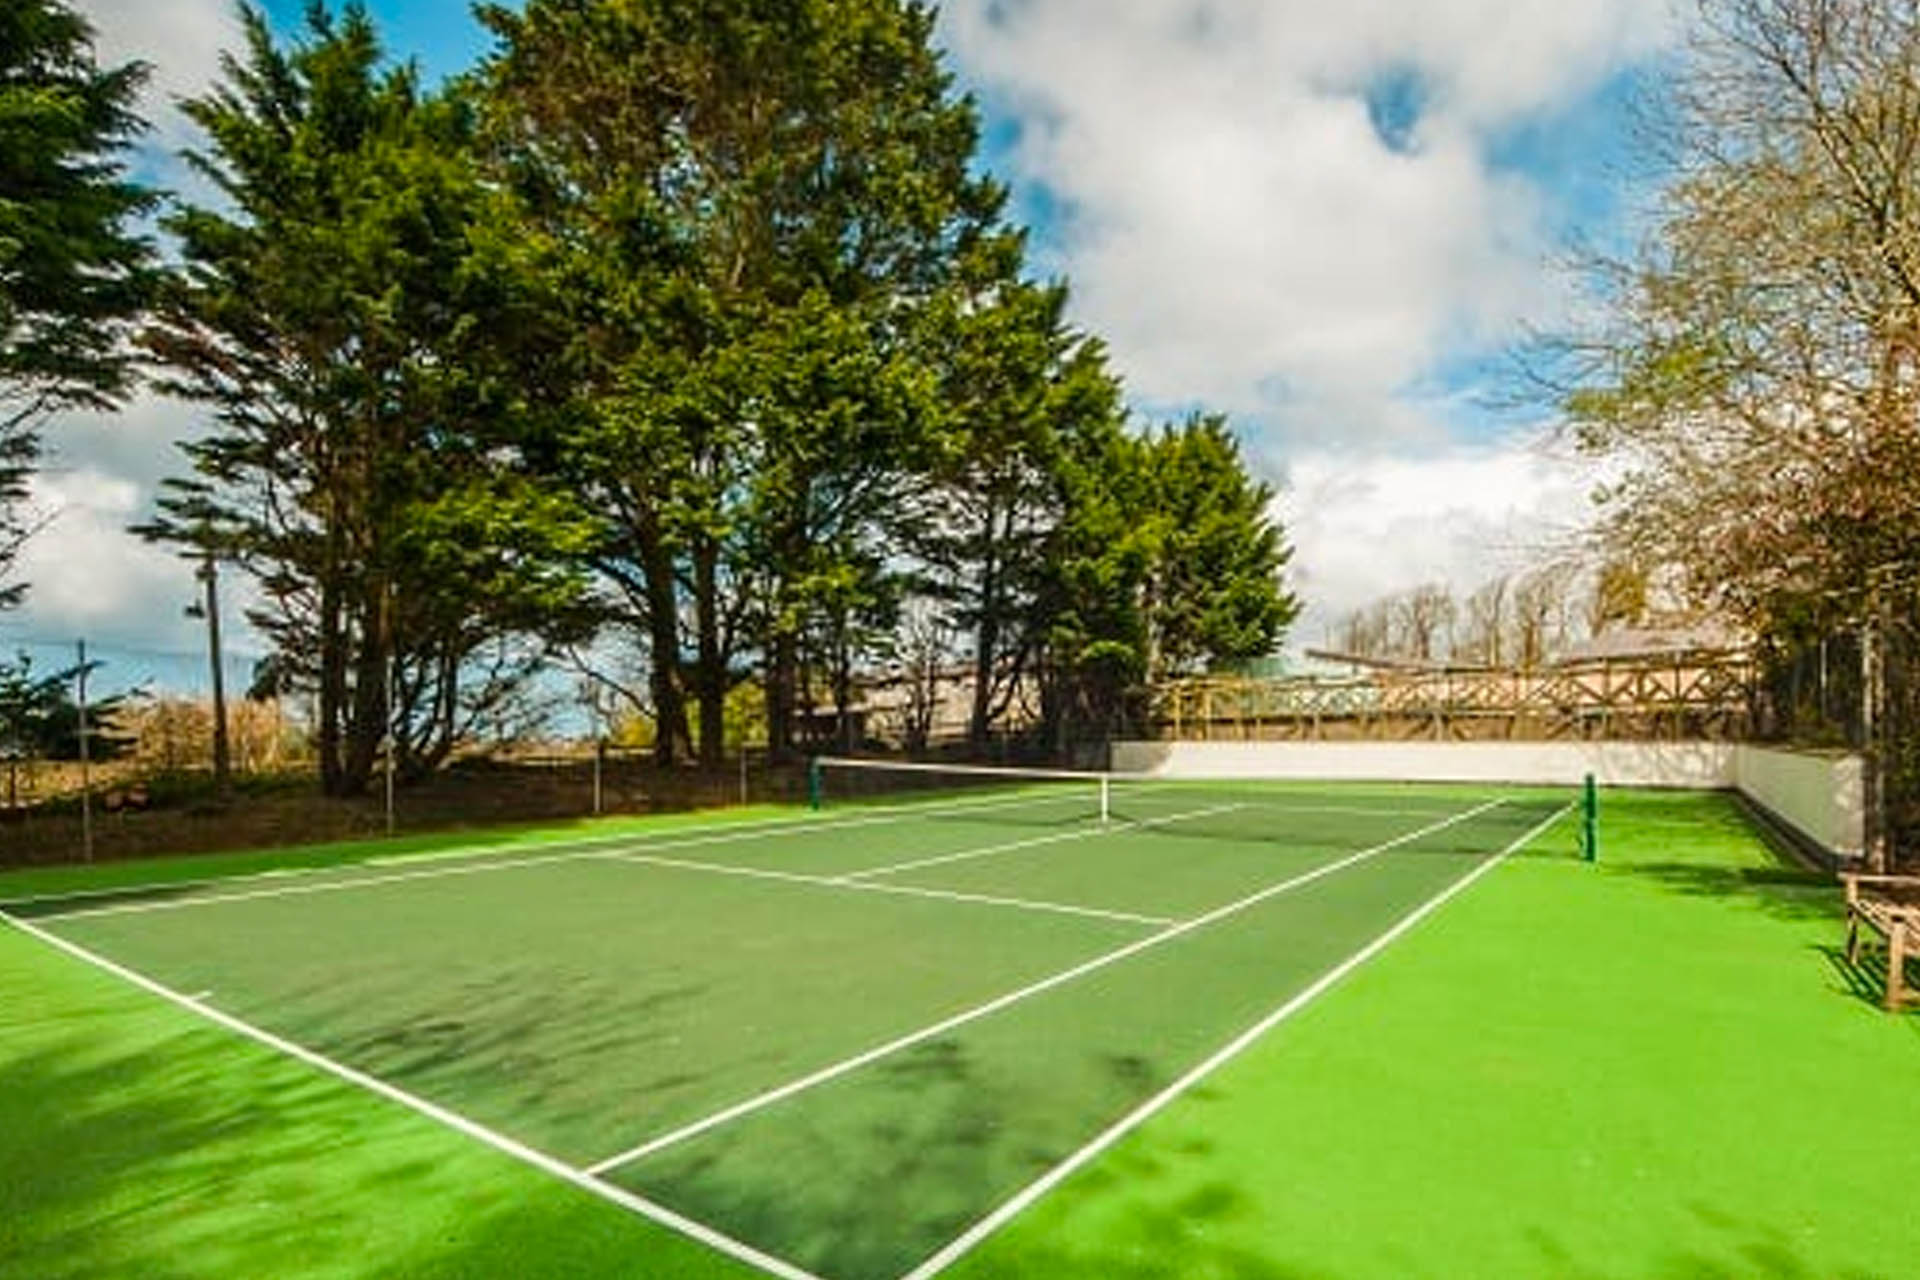 Tennis at Broom Hill Manor Self catering cottages